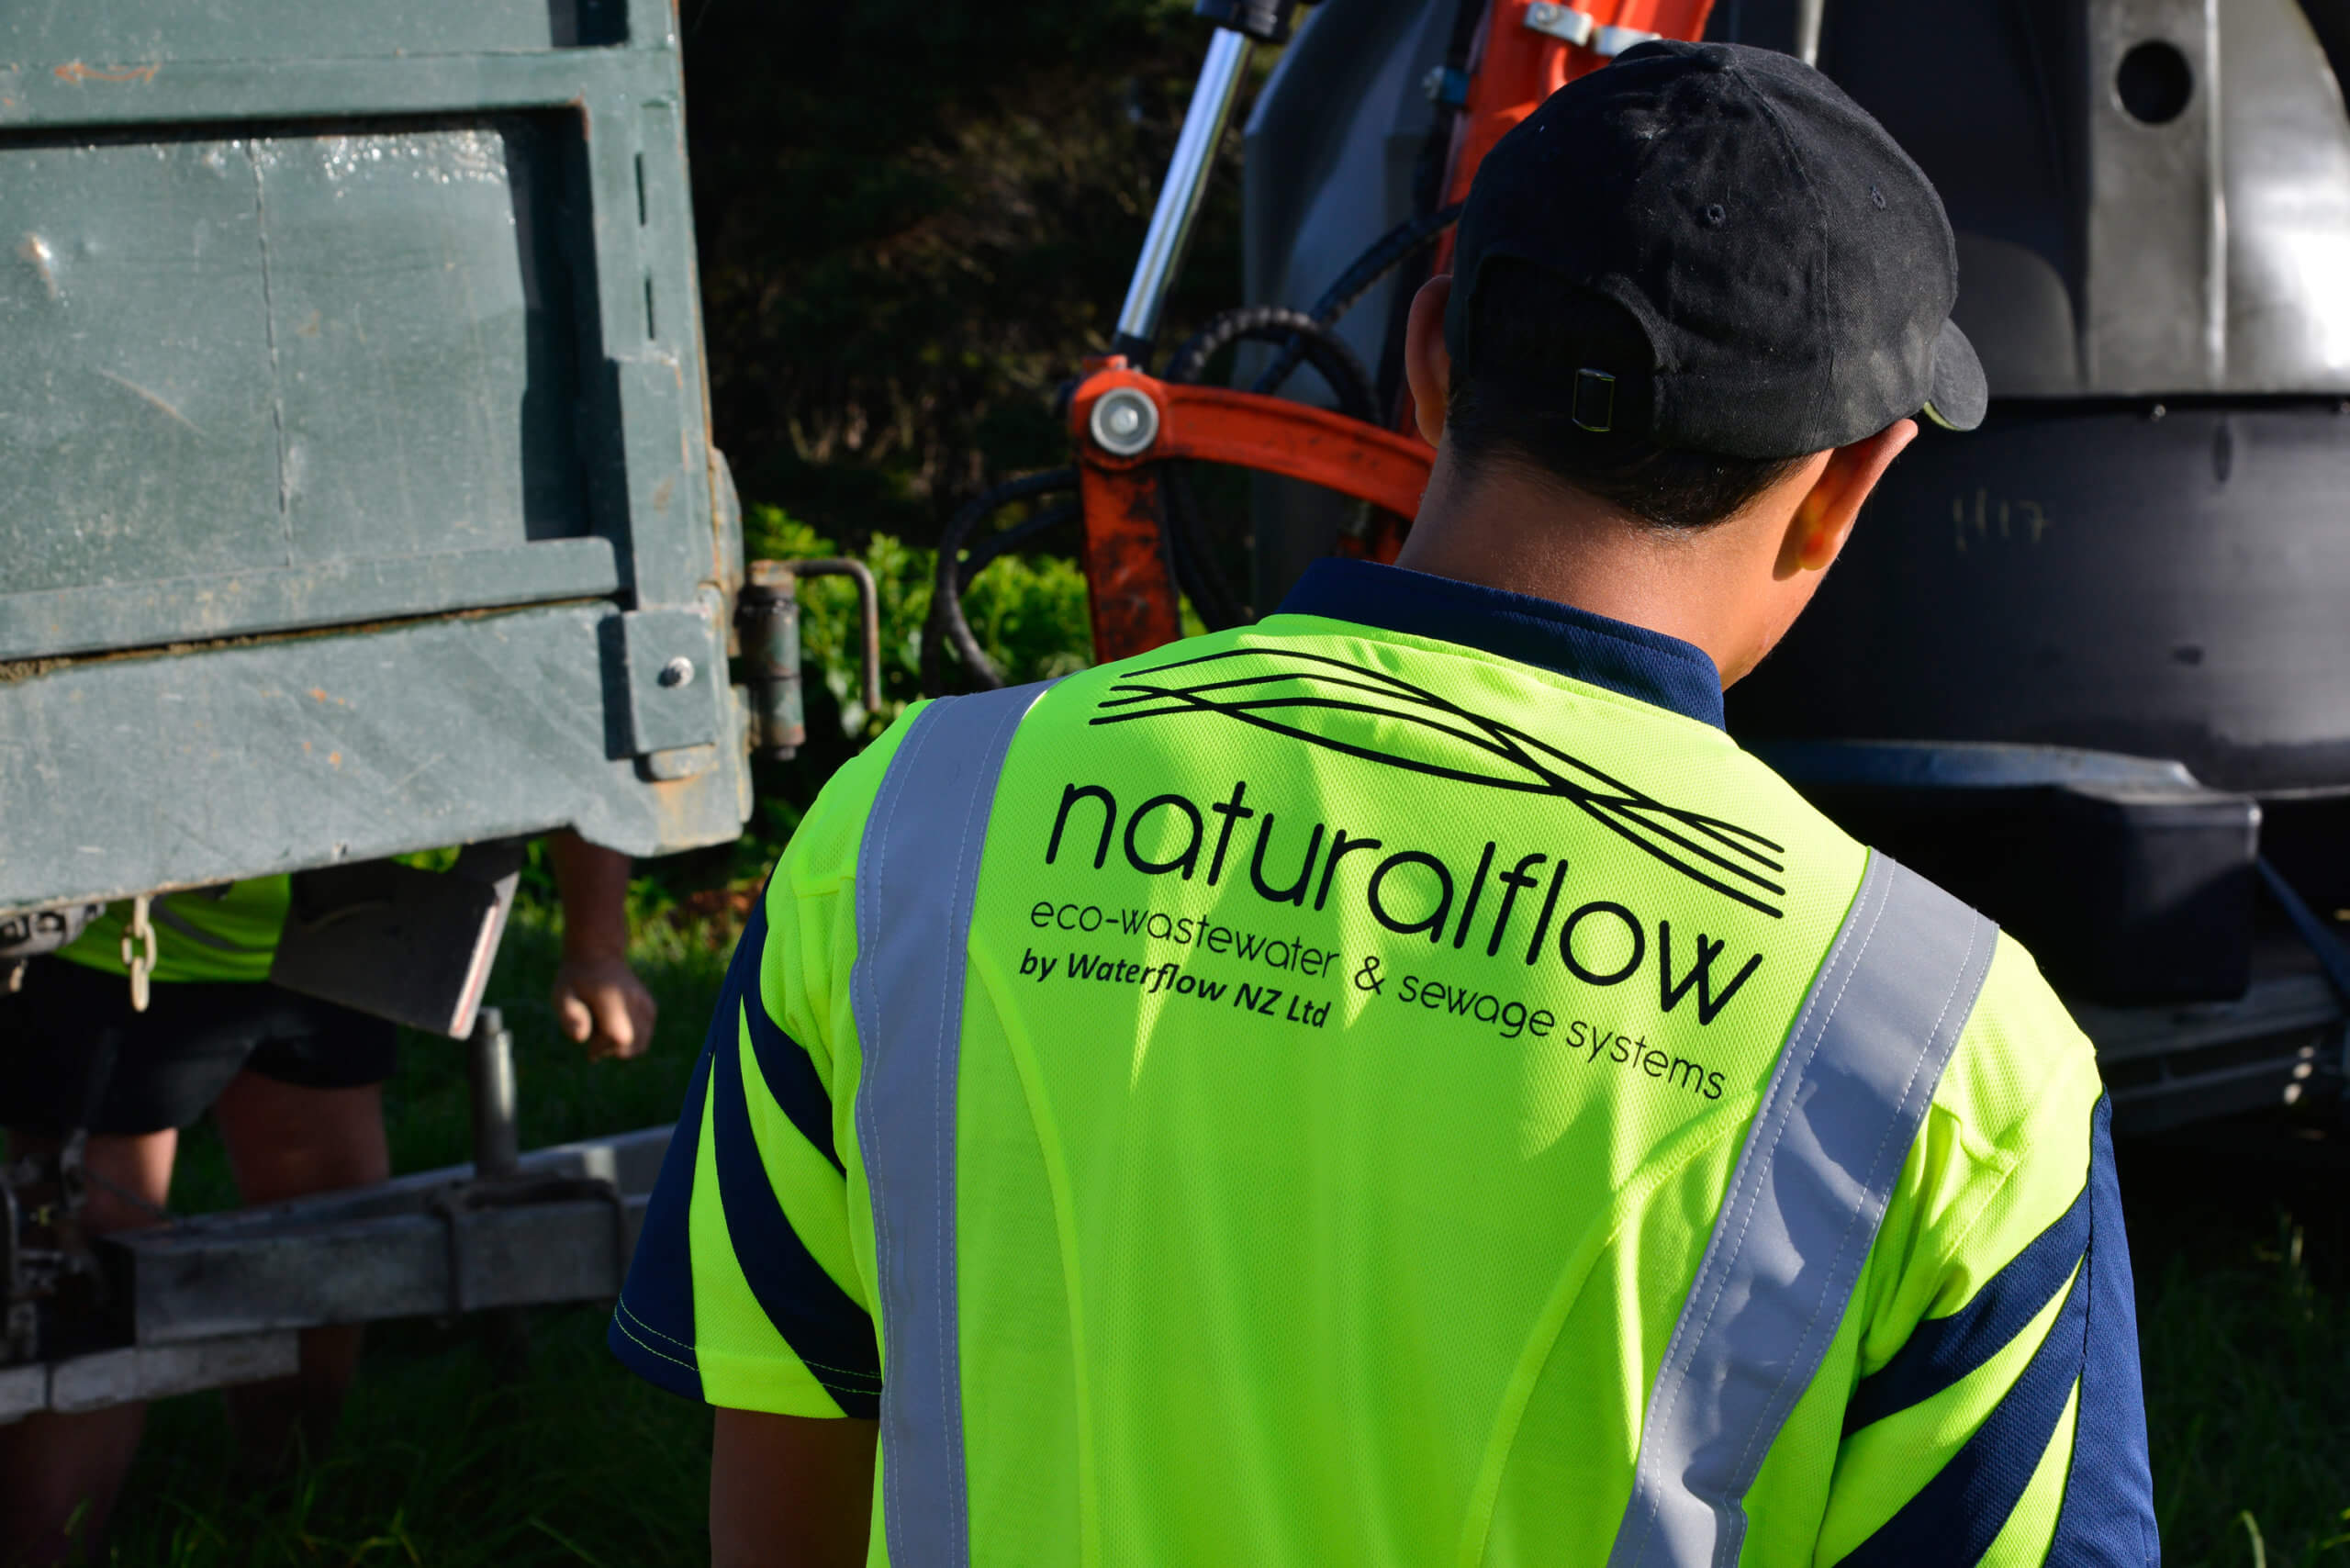 Naturalflow_eco-wastewater_and_sewage_systems_shirt